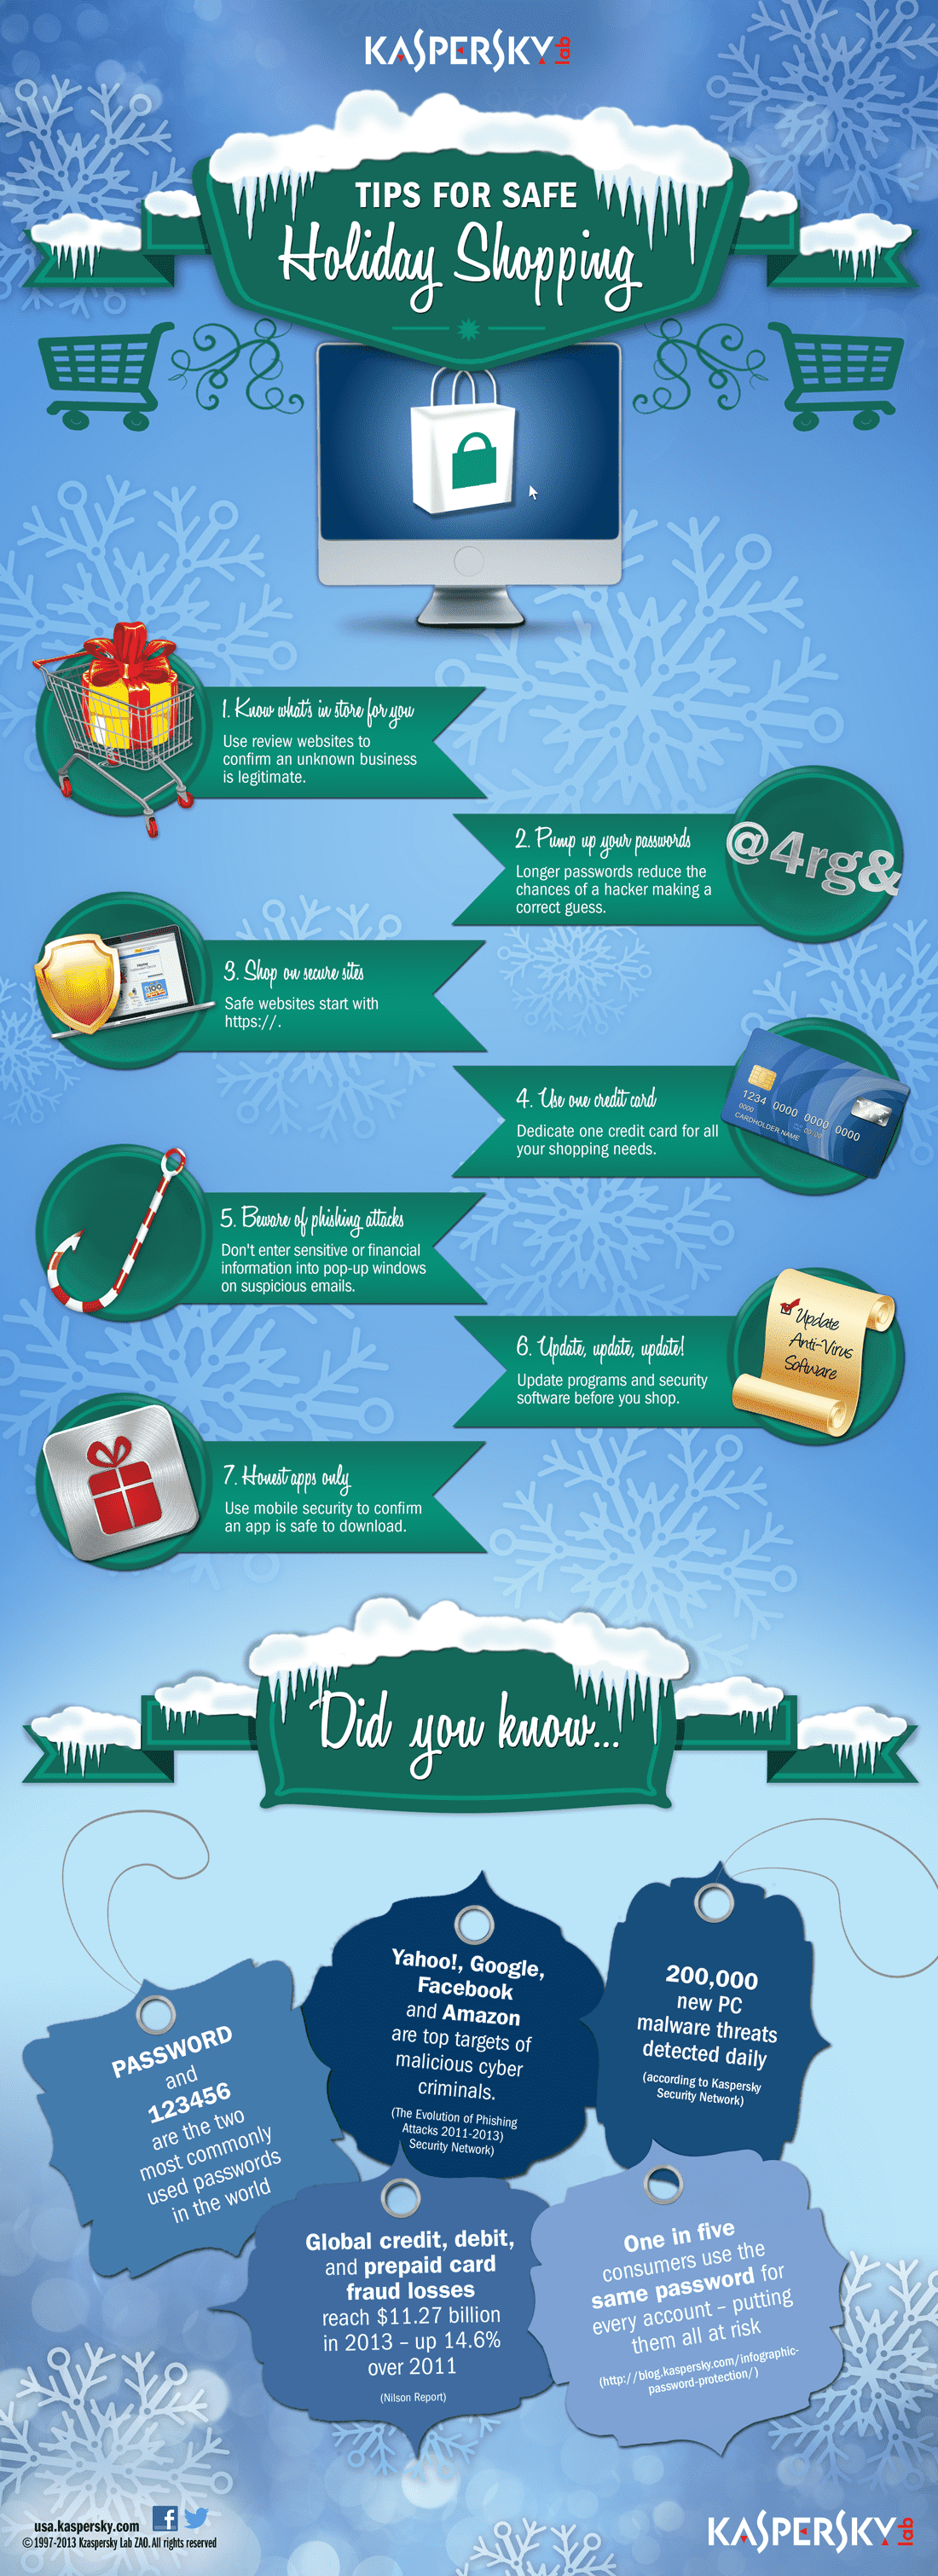 Infographic: Online Shopping Security Tips for the Holidays